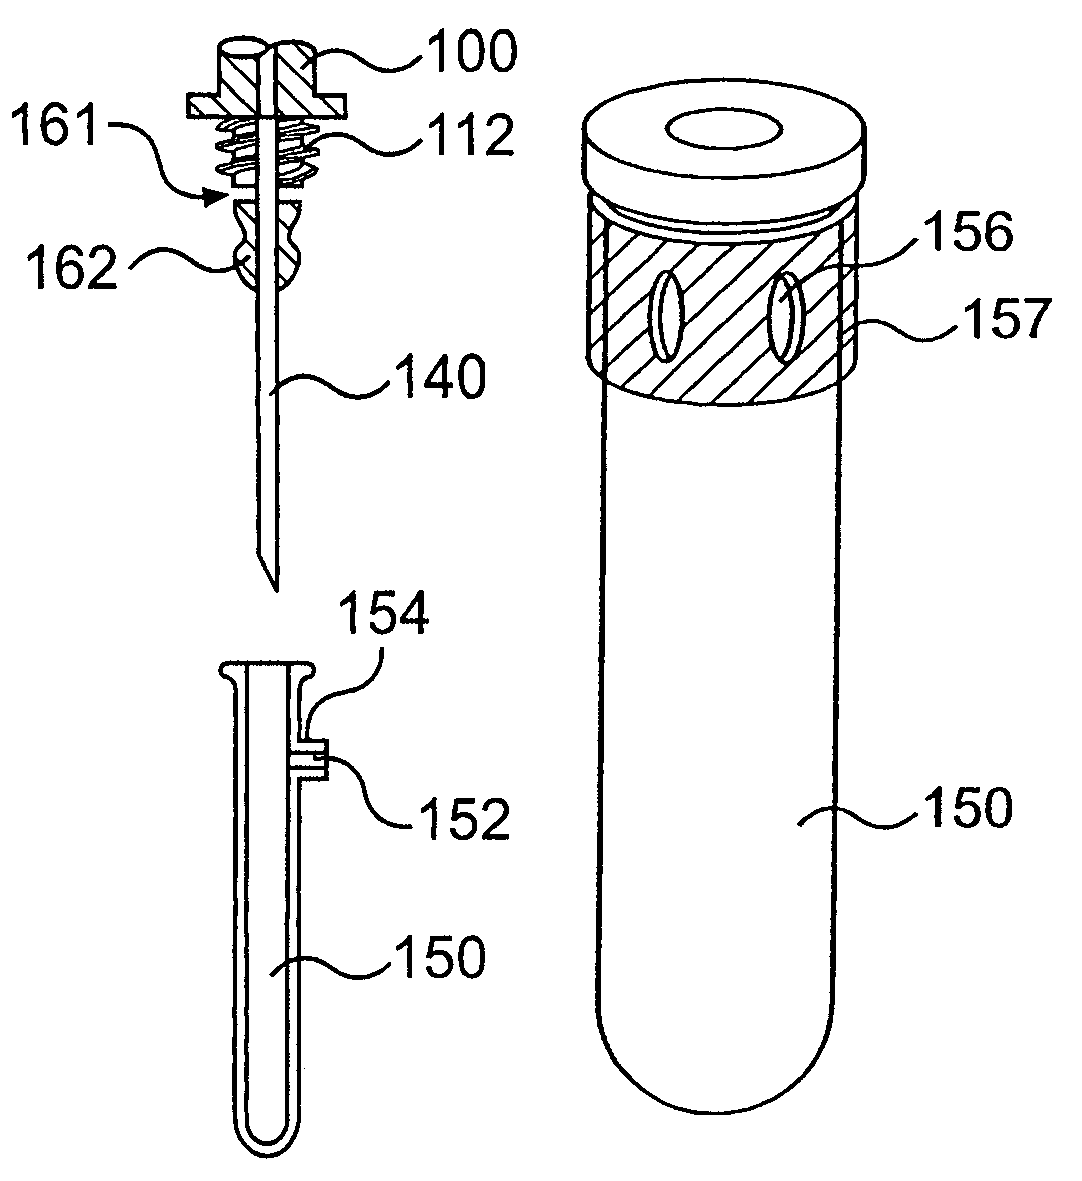 Porous multiple sample sleeve and blood drawing device for flash detection